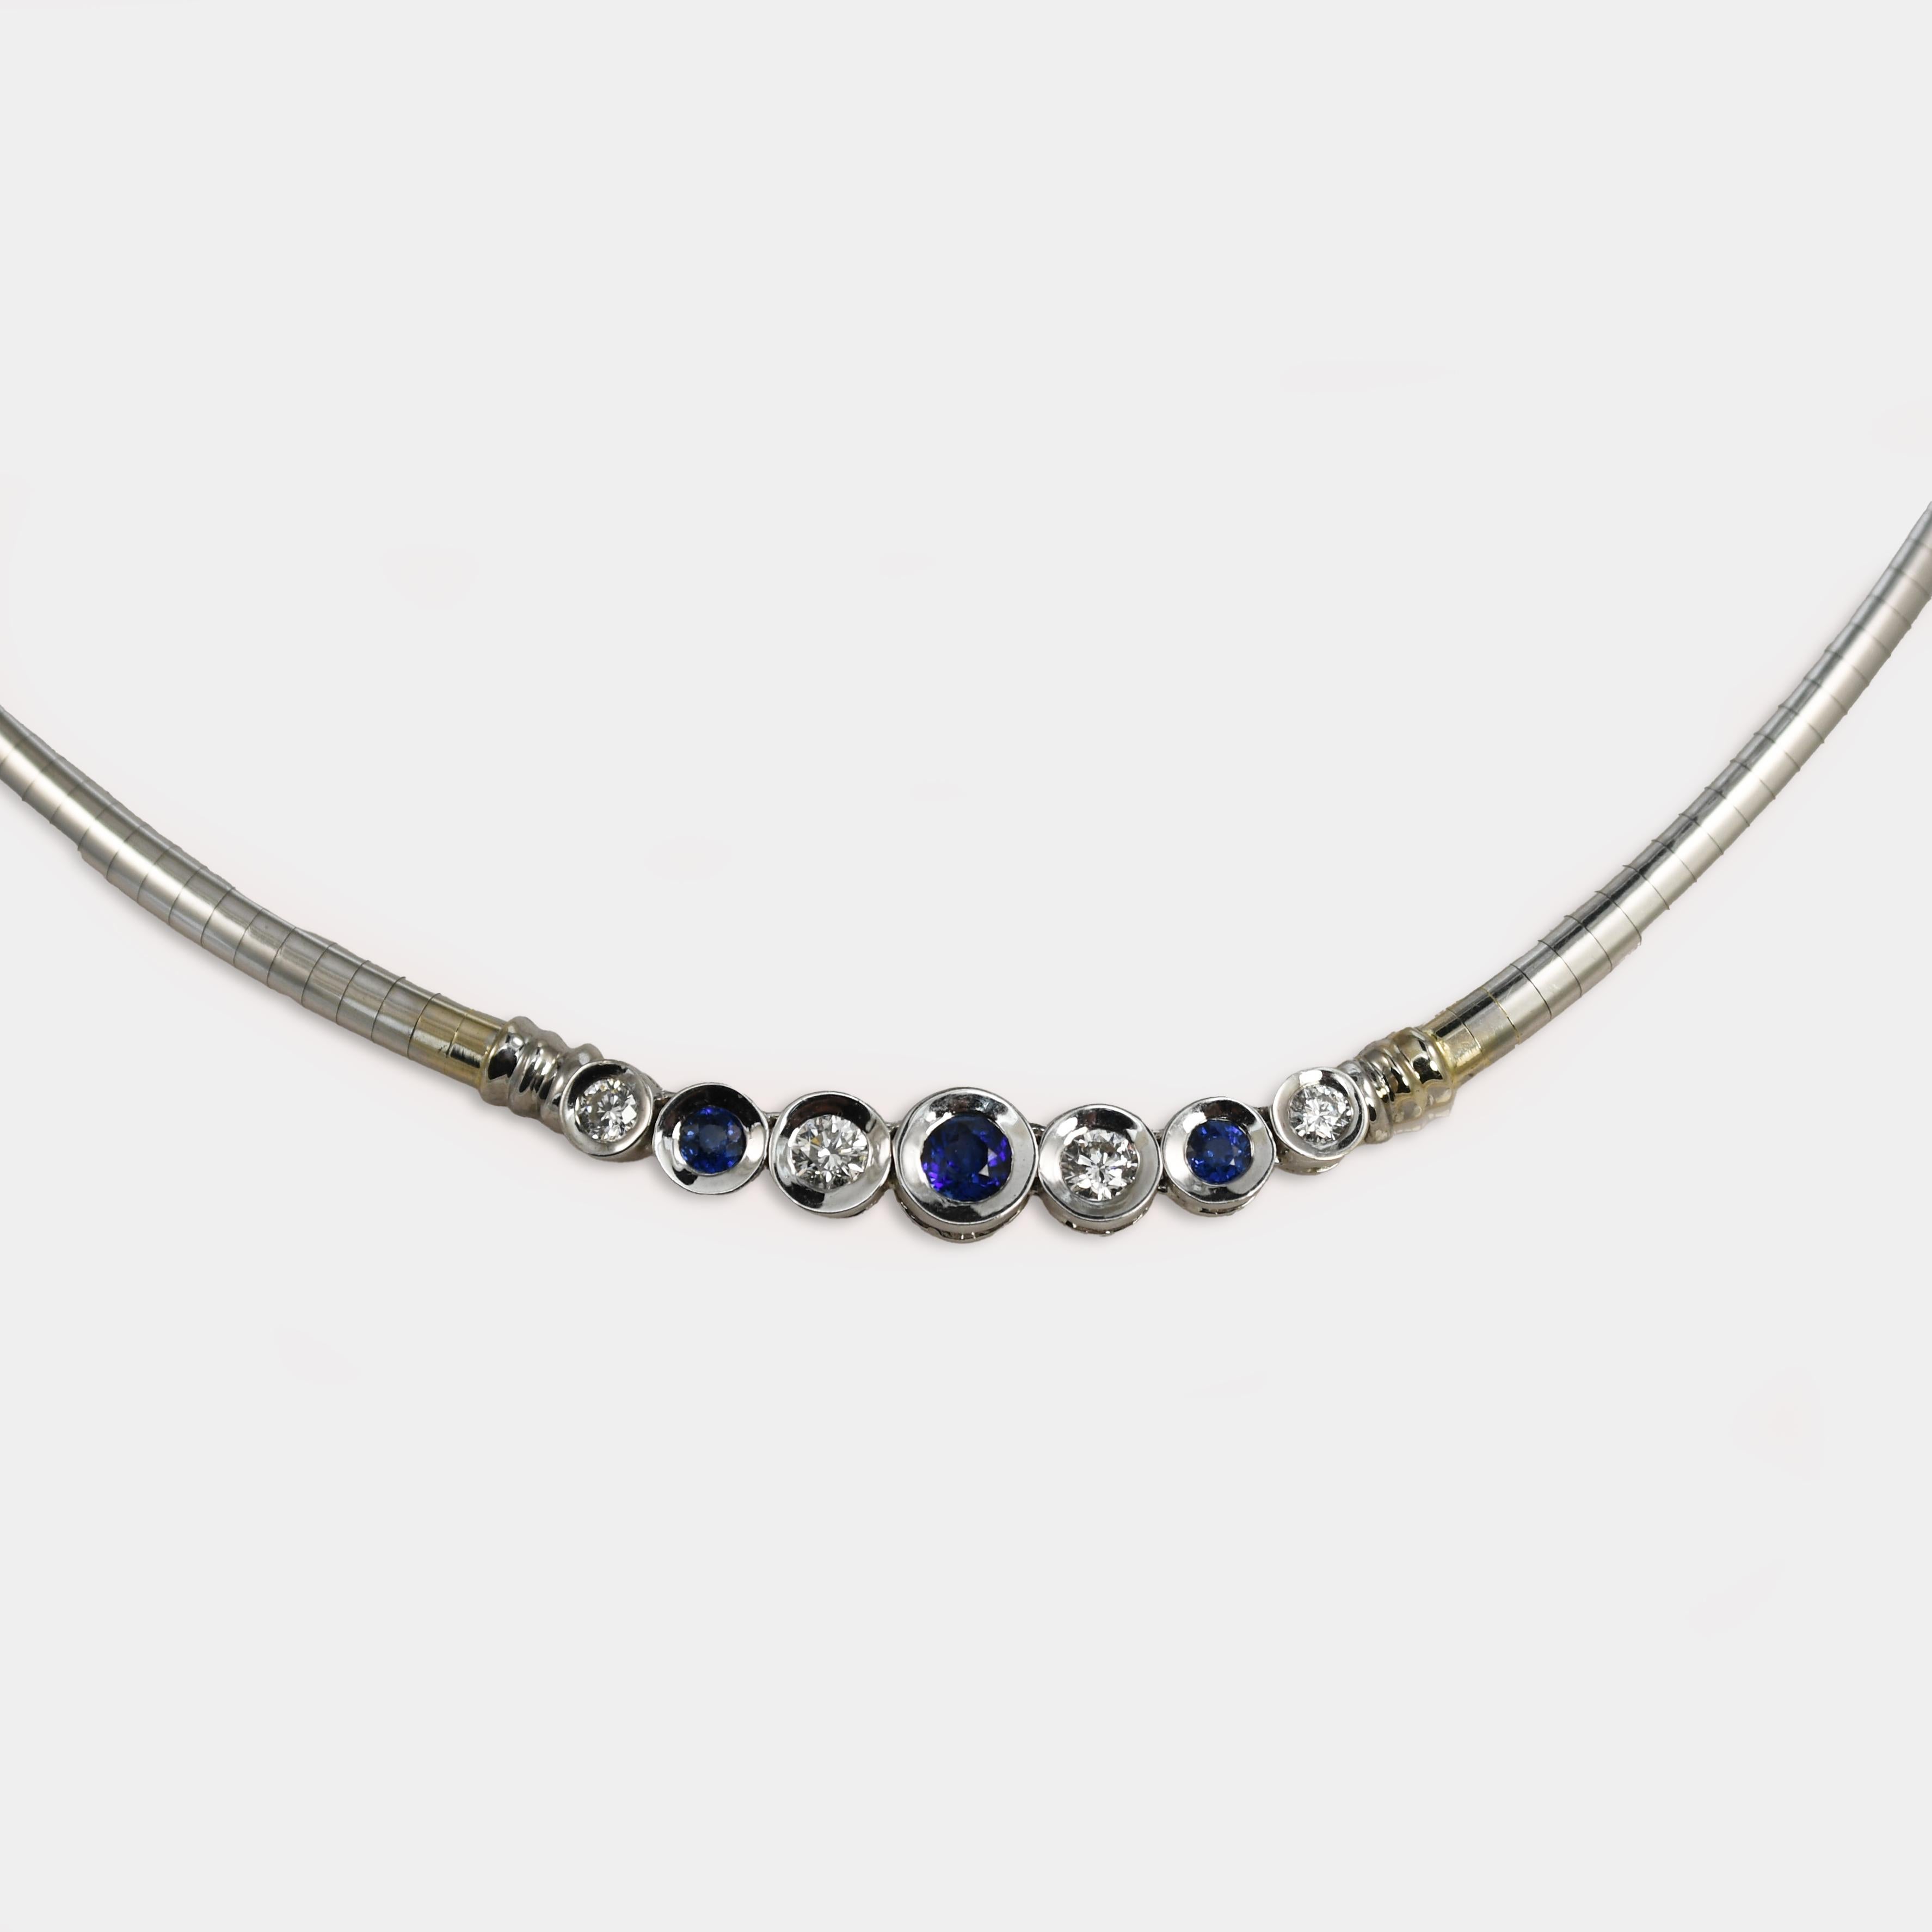 Ladies' sapphire and diamond necklace with 14k white gold setting.
Stamped 14k Italy and weighs 22.2 grams.
The blue sapphires are round brilliant cuts, .40 total carats, and attractive colors.
The diamonds are round brilliant cuts, .33 total